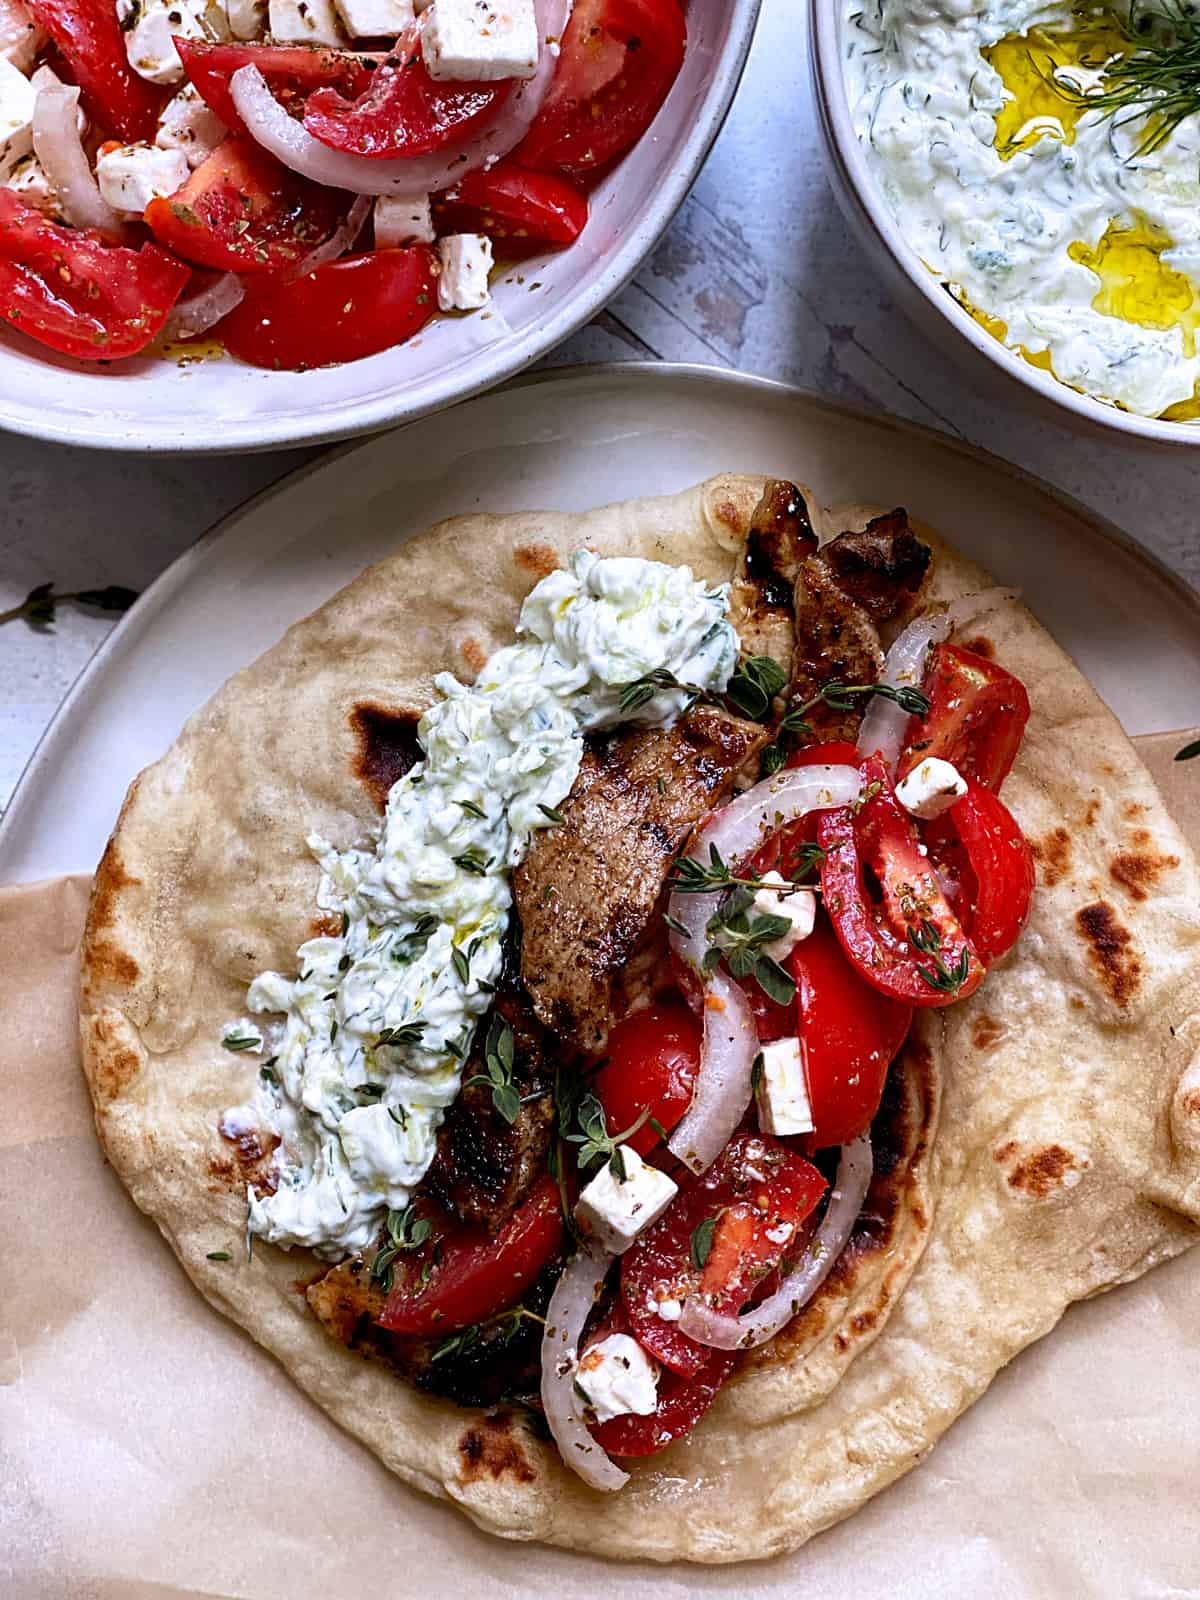 A plate with fillings for Greek souvlaki, a tzatziki bowl and tomato salad.